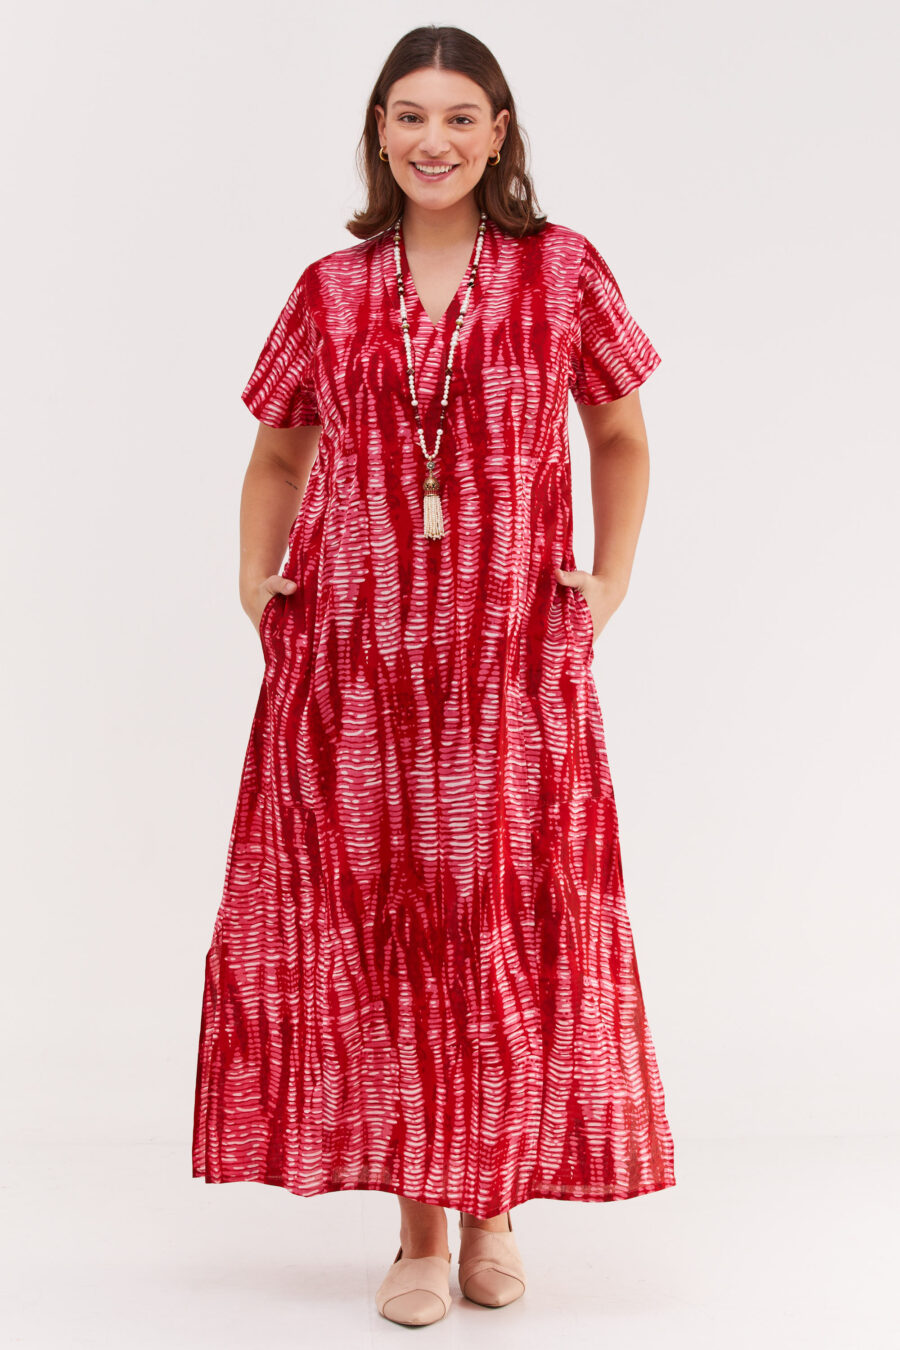 Jalabiya dress | Uniquely designed dress - Stone red print, pink dress with red stone-like print by comfort zone boutique